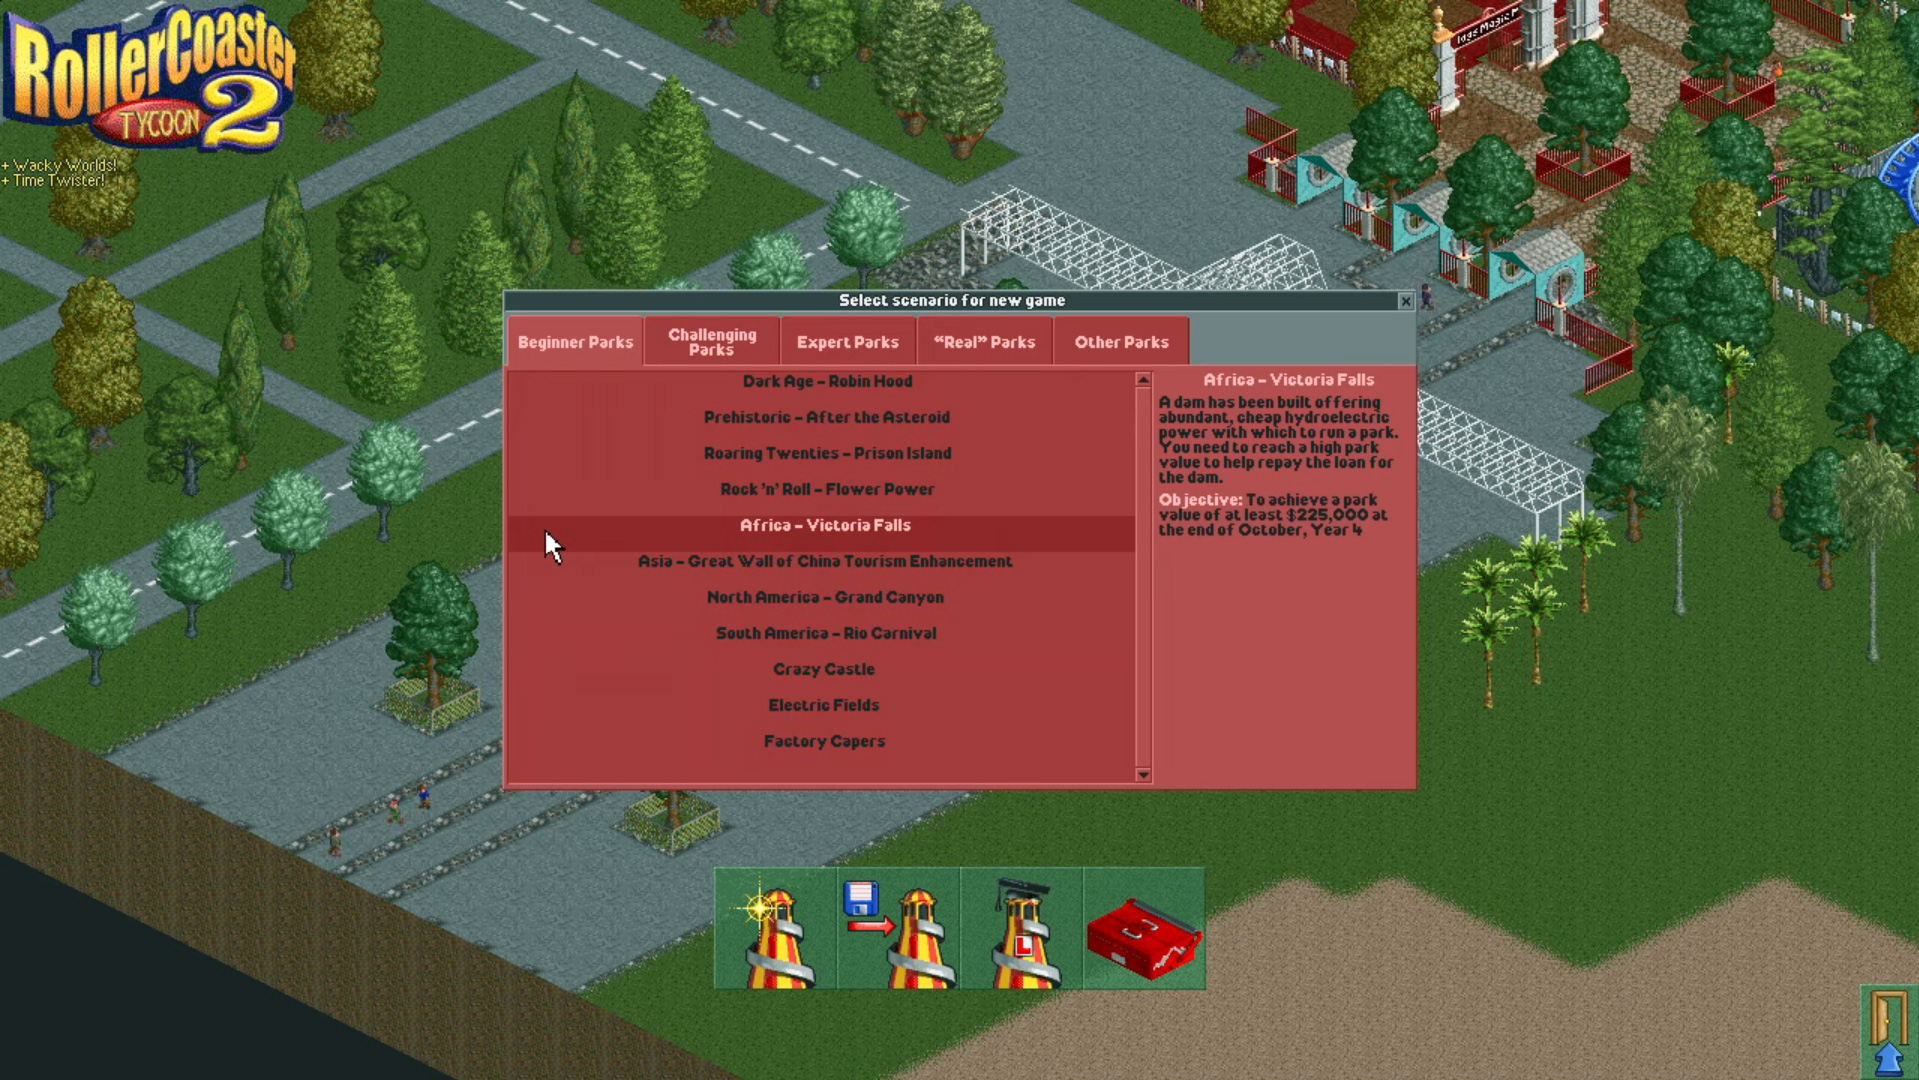 Roller Coaster Tycoon 2 Level Select